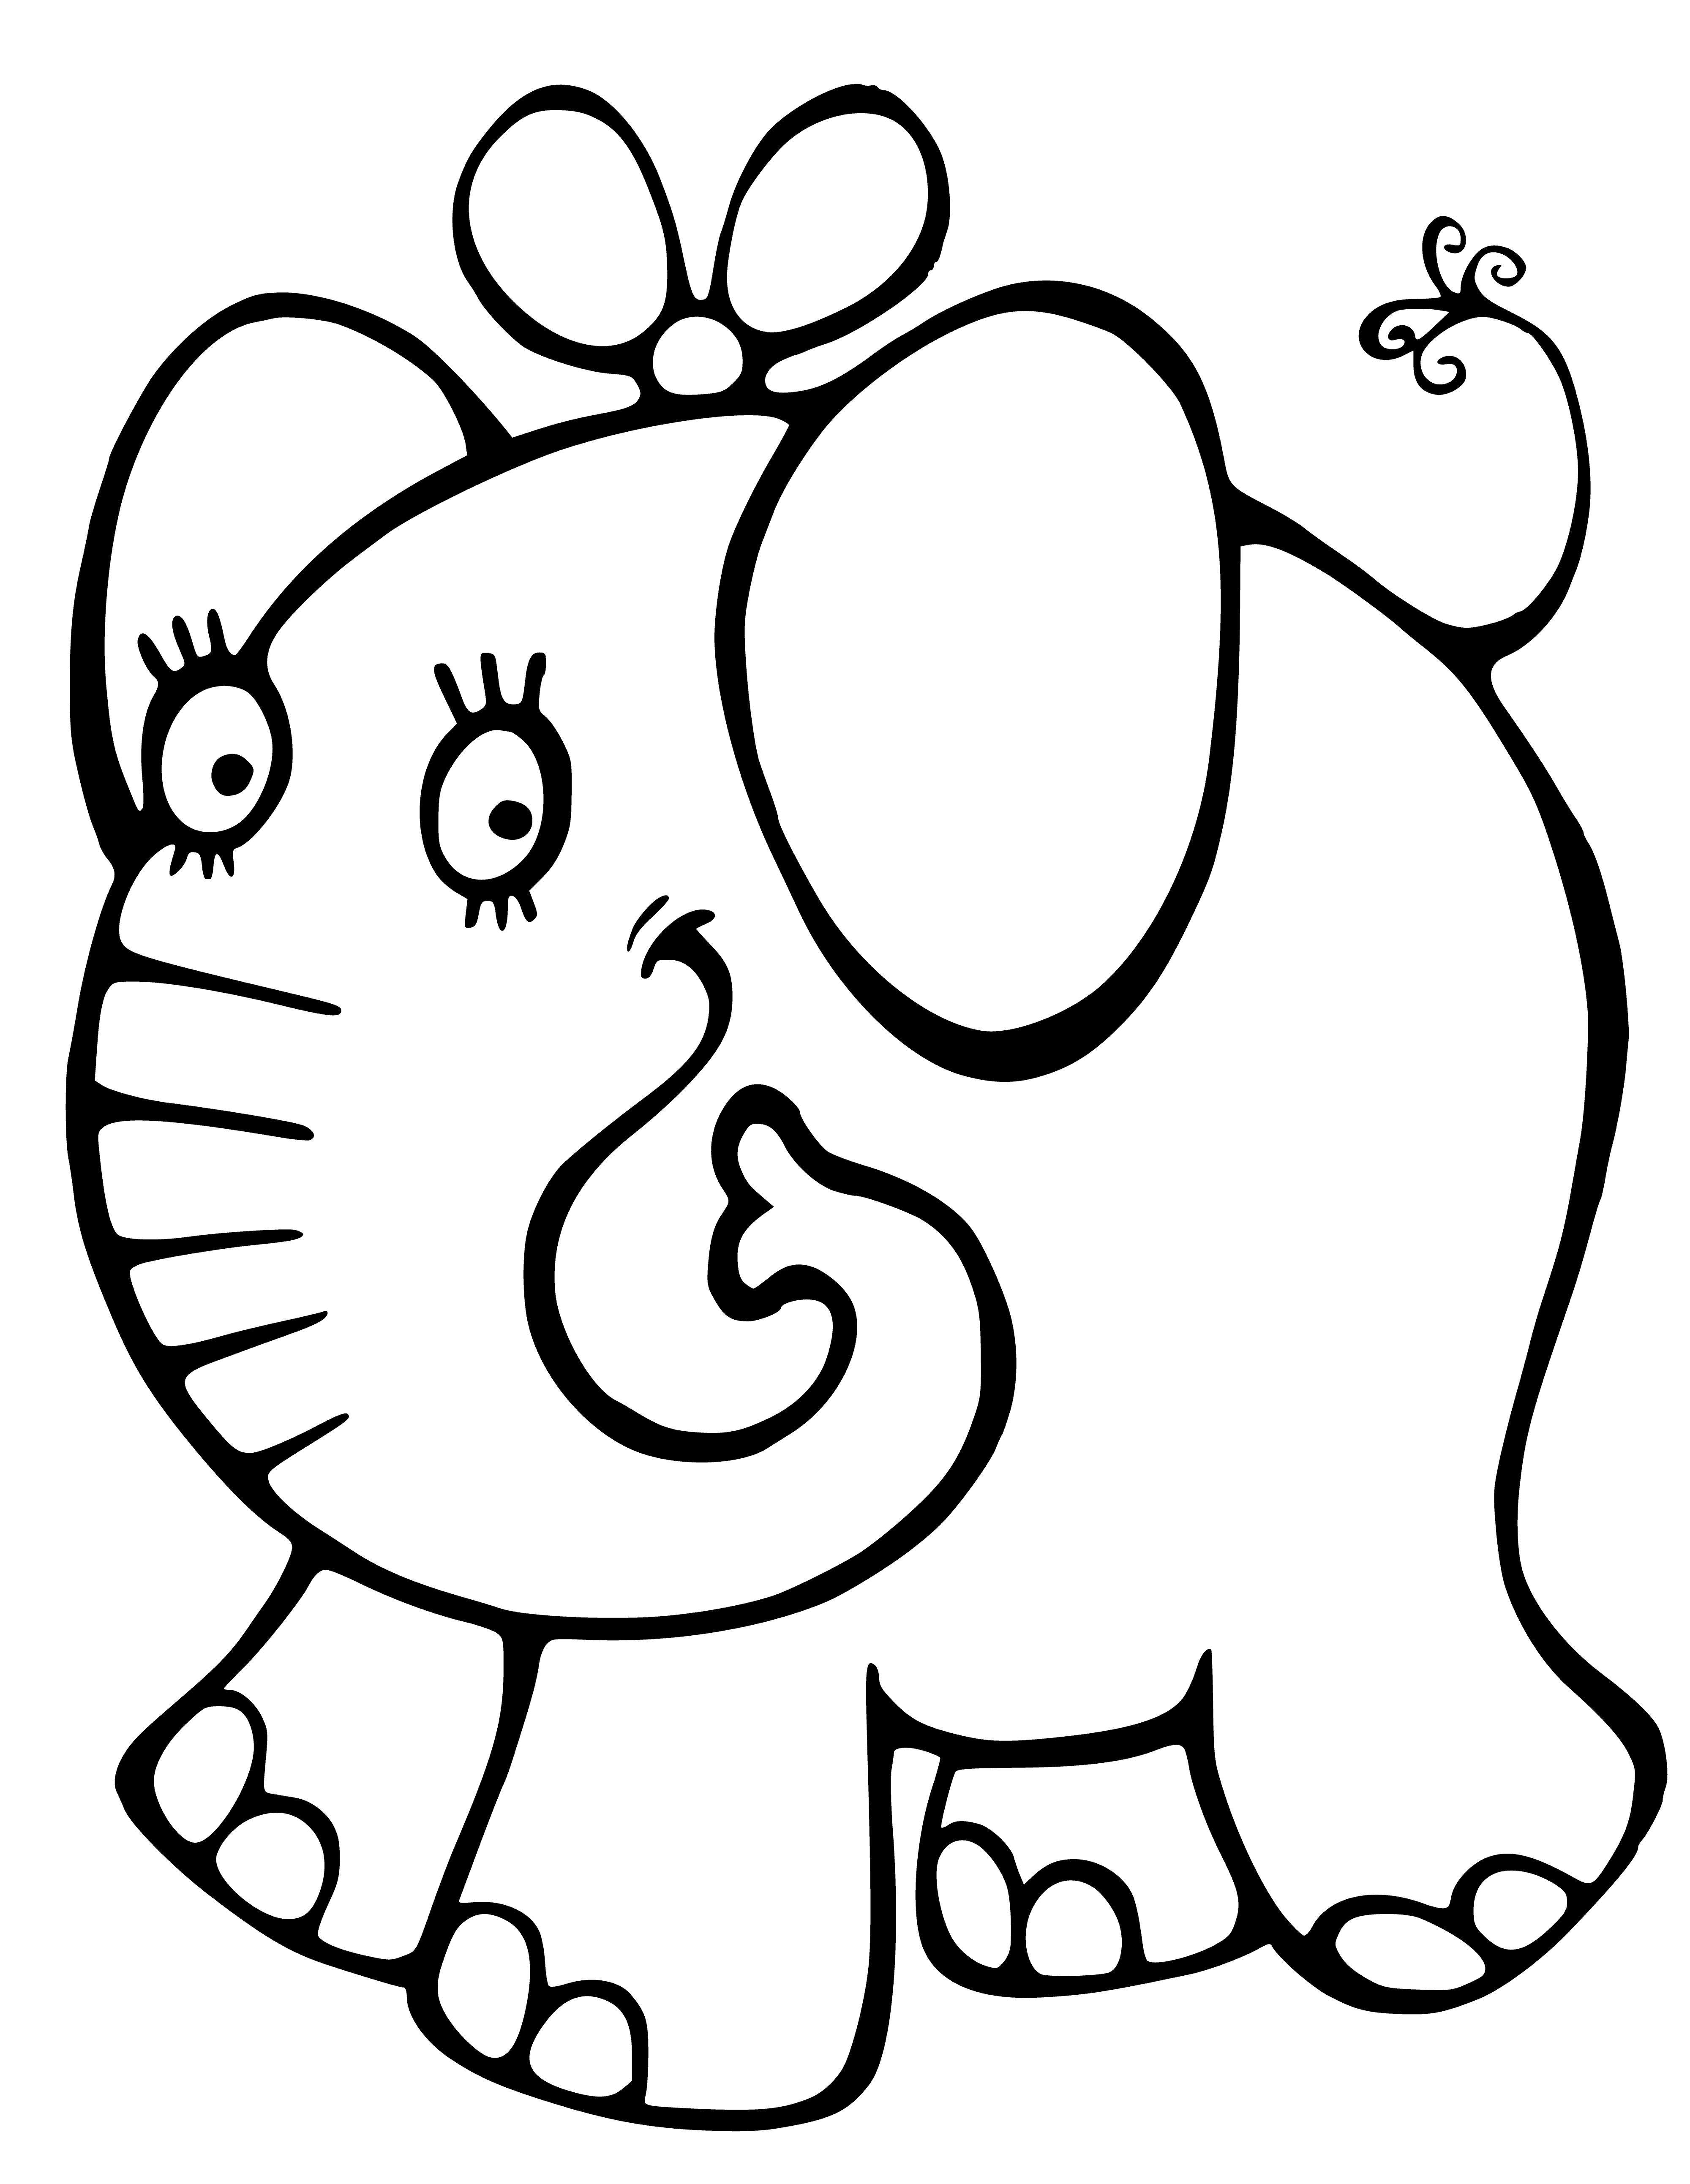 coloring page: Giant gray elephant with long, curved tusks, wrinkled skin, and four short legs dominates page.